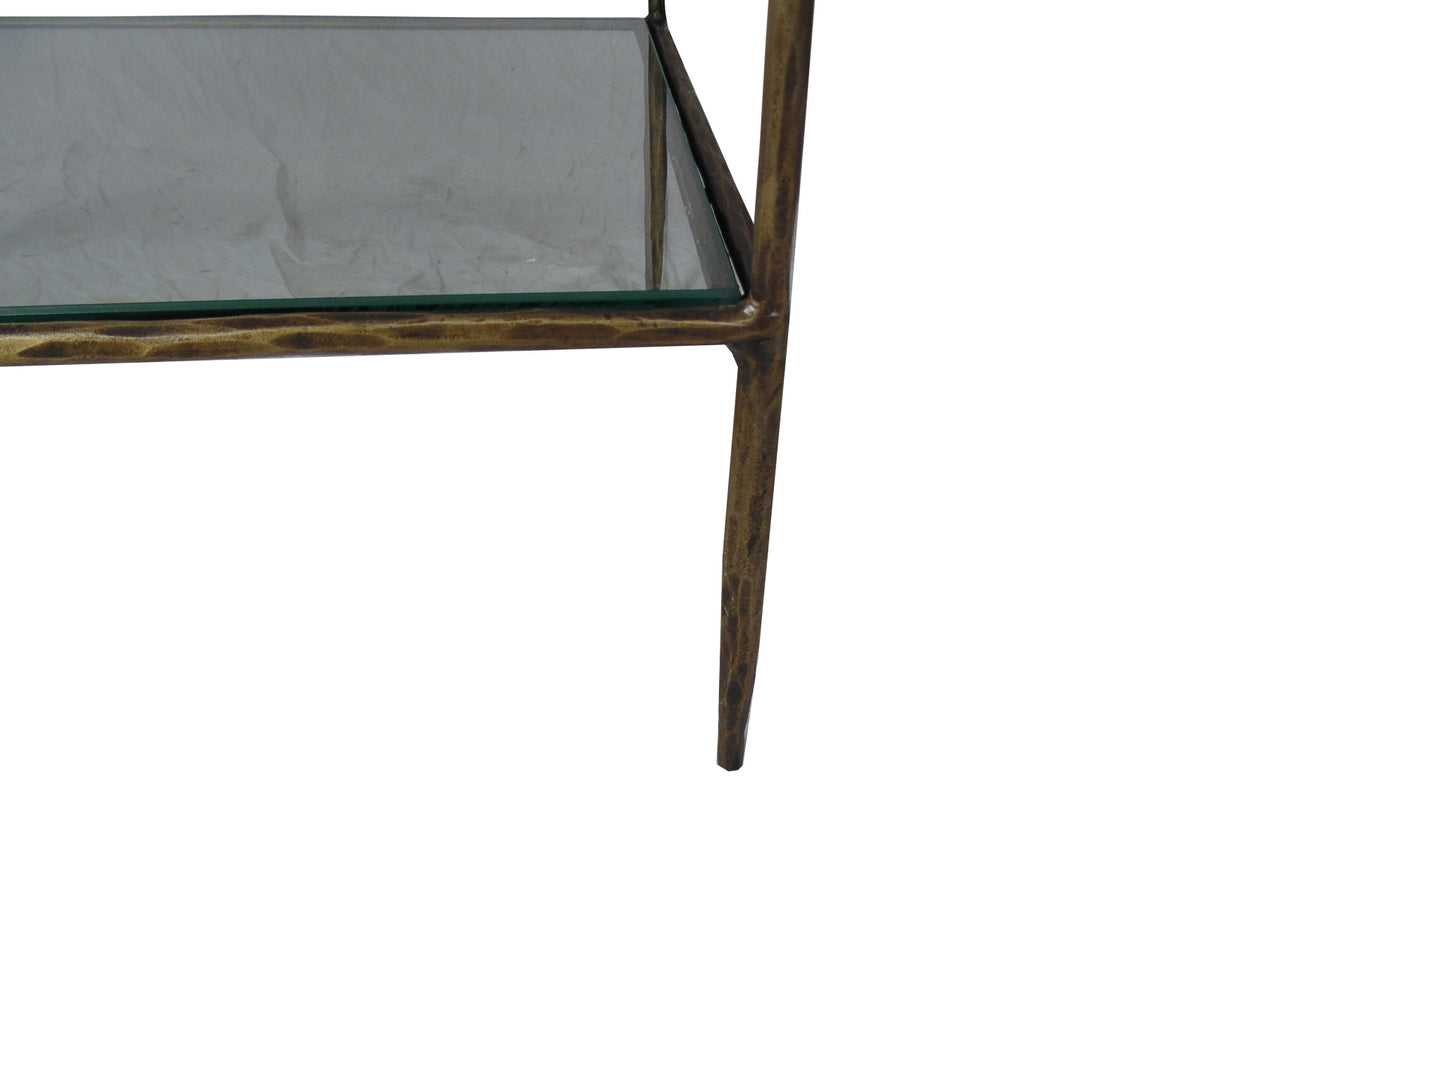 59" Brass Iron and Glass Five Tier Etagere Bookcase